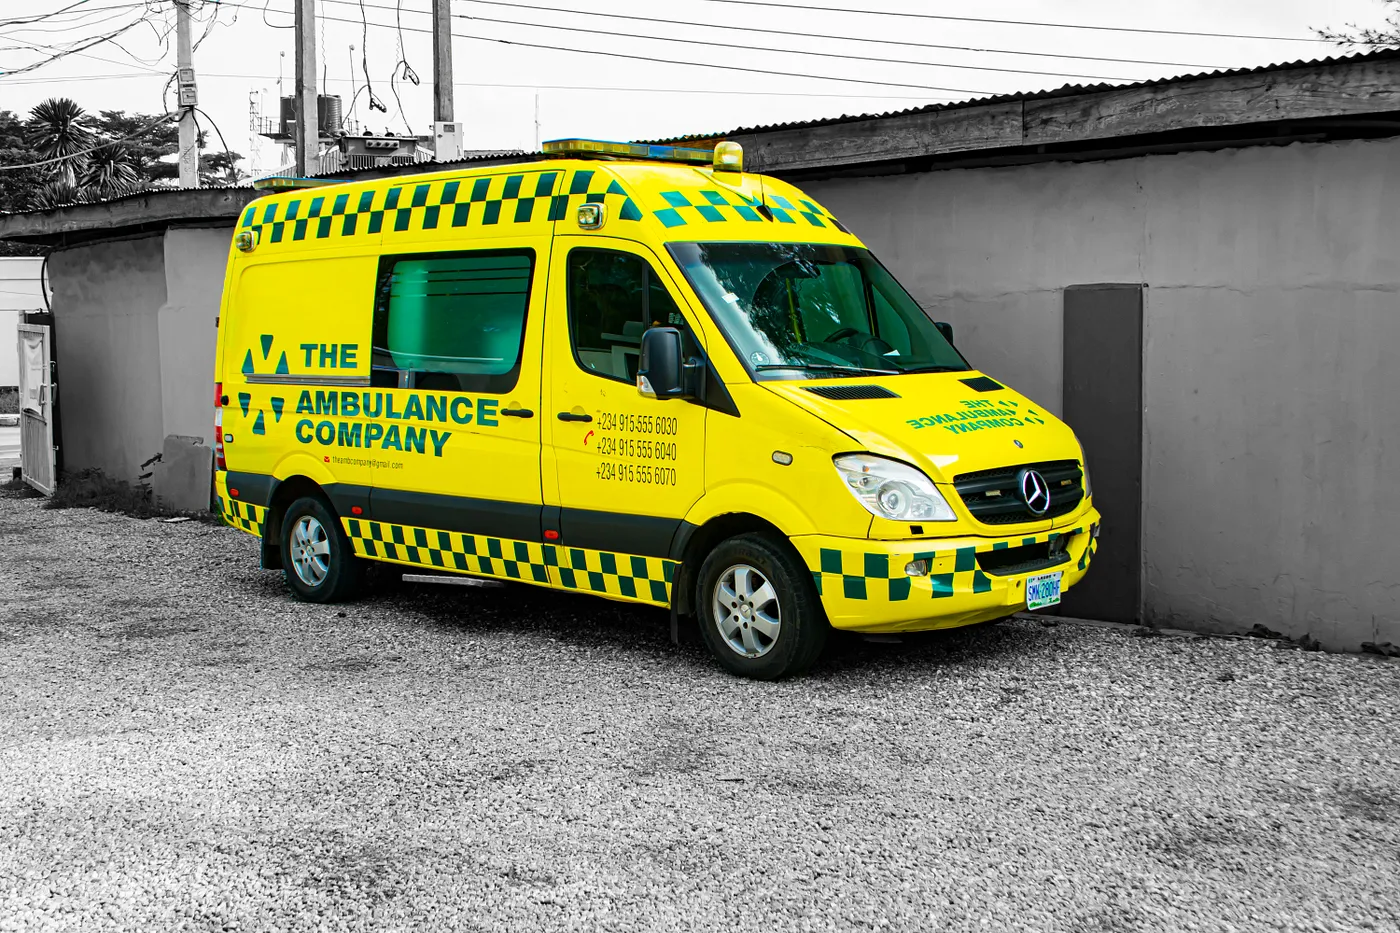 Our Ambulance is readily available